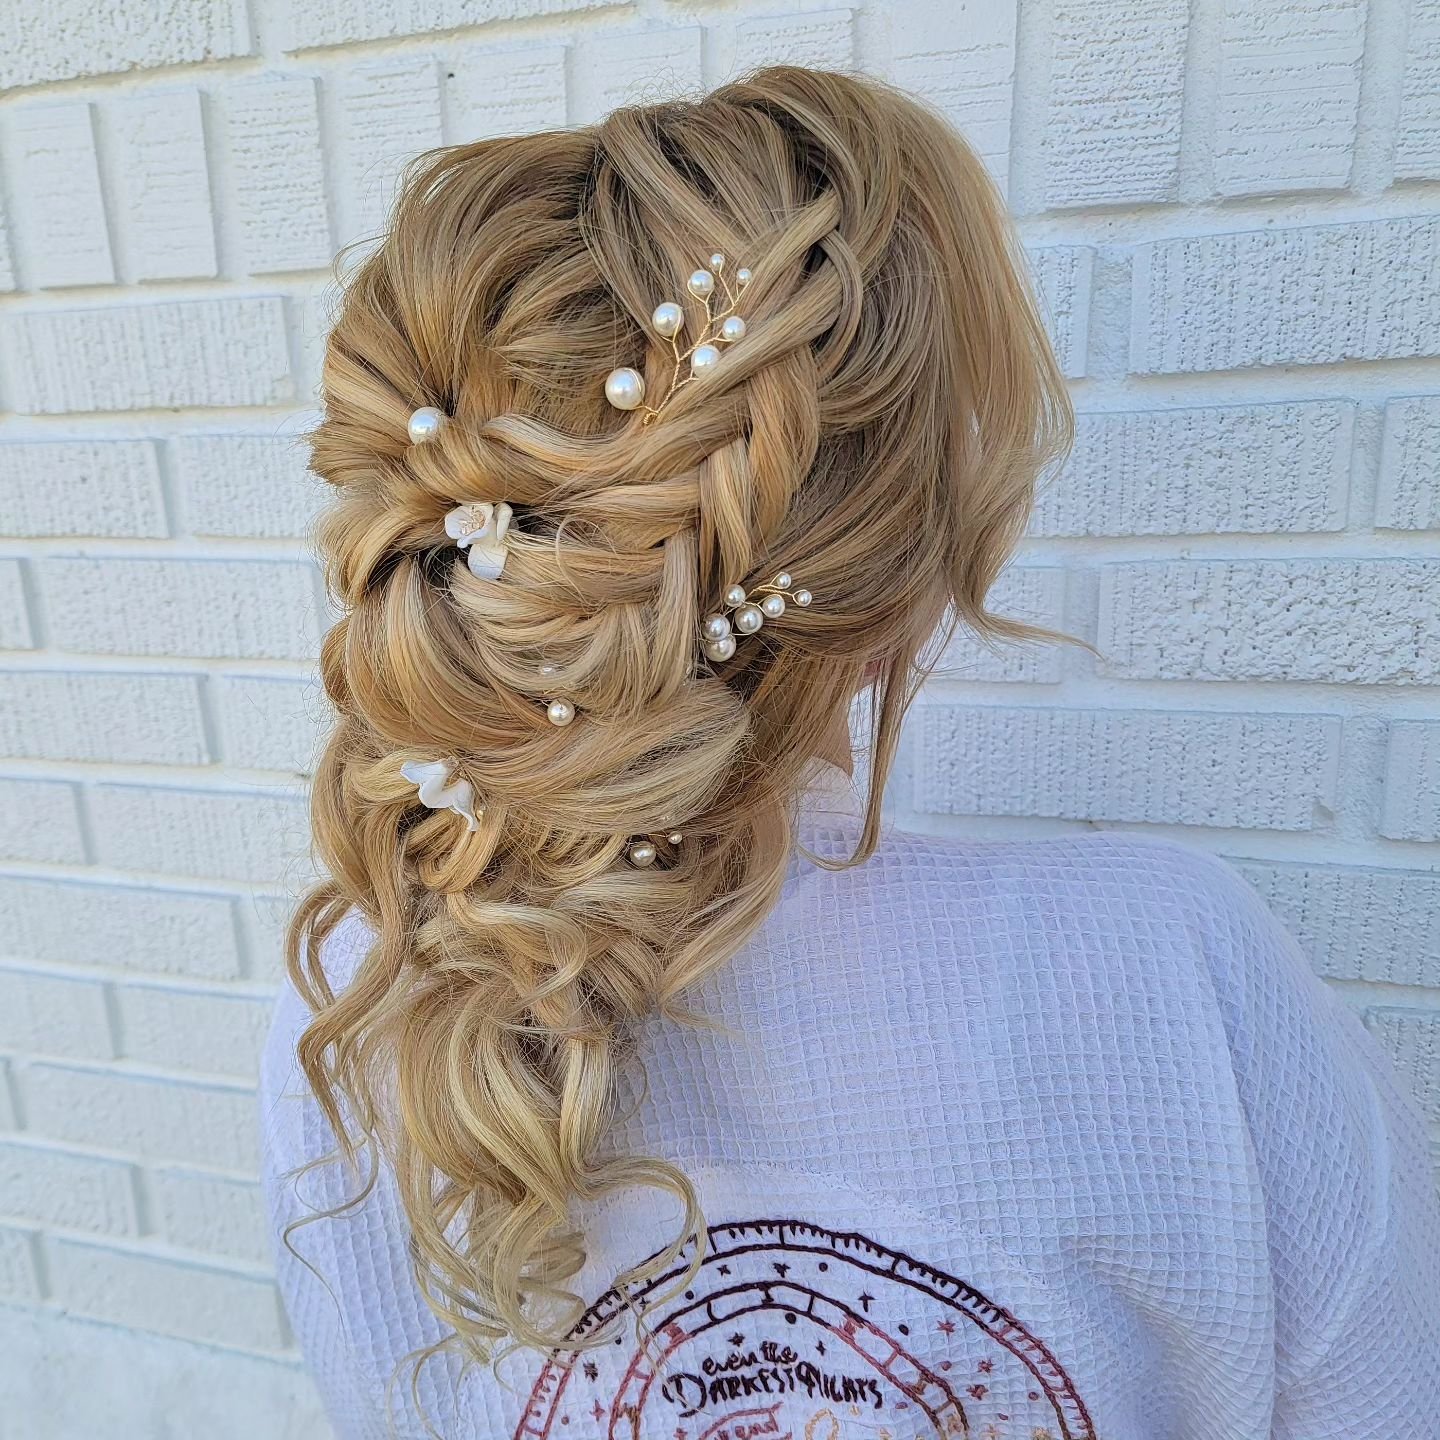 Sophisticated &amp; romantic. We love how pearls and other accents elevate updos🤍

Hair by Lori 
#idoglamcrewlori
Venue: @graycegardens 

#marylandbridalhairstylist #marylandbridalhair #marylandhairstylist #dmvbridalhairstylist #dmvbridalhair #maryl